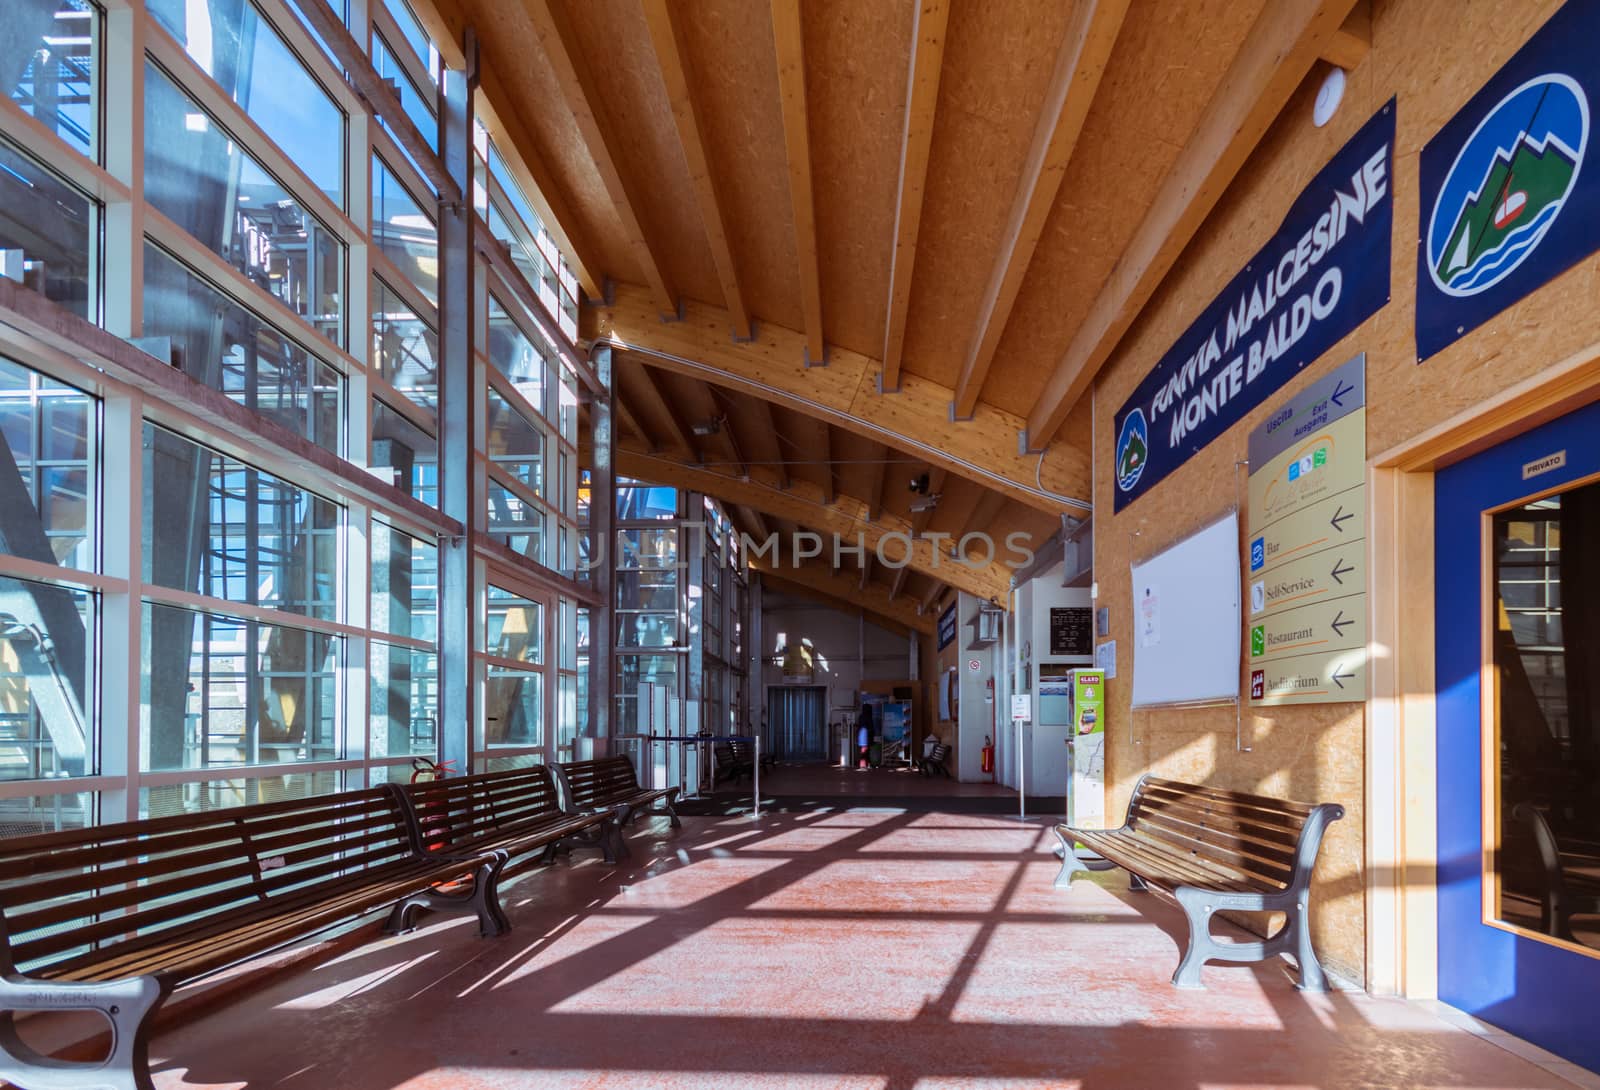 Malcesine, Italy - January 18, 2016:  Waiting room inside the mountain station of the Malcesine-Mount Baldo cableway, Italy